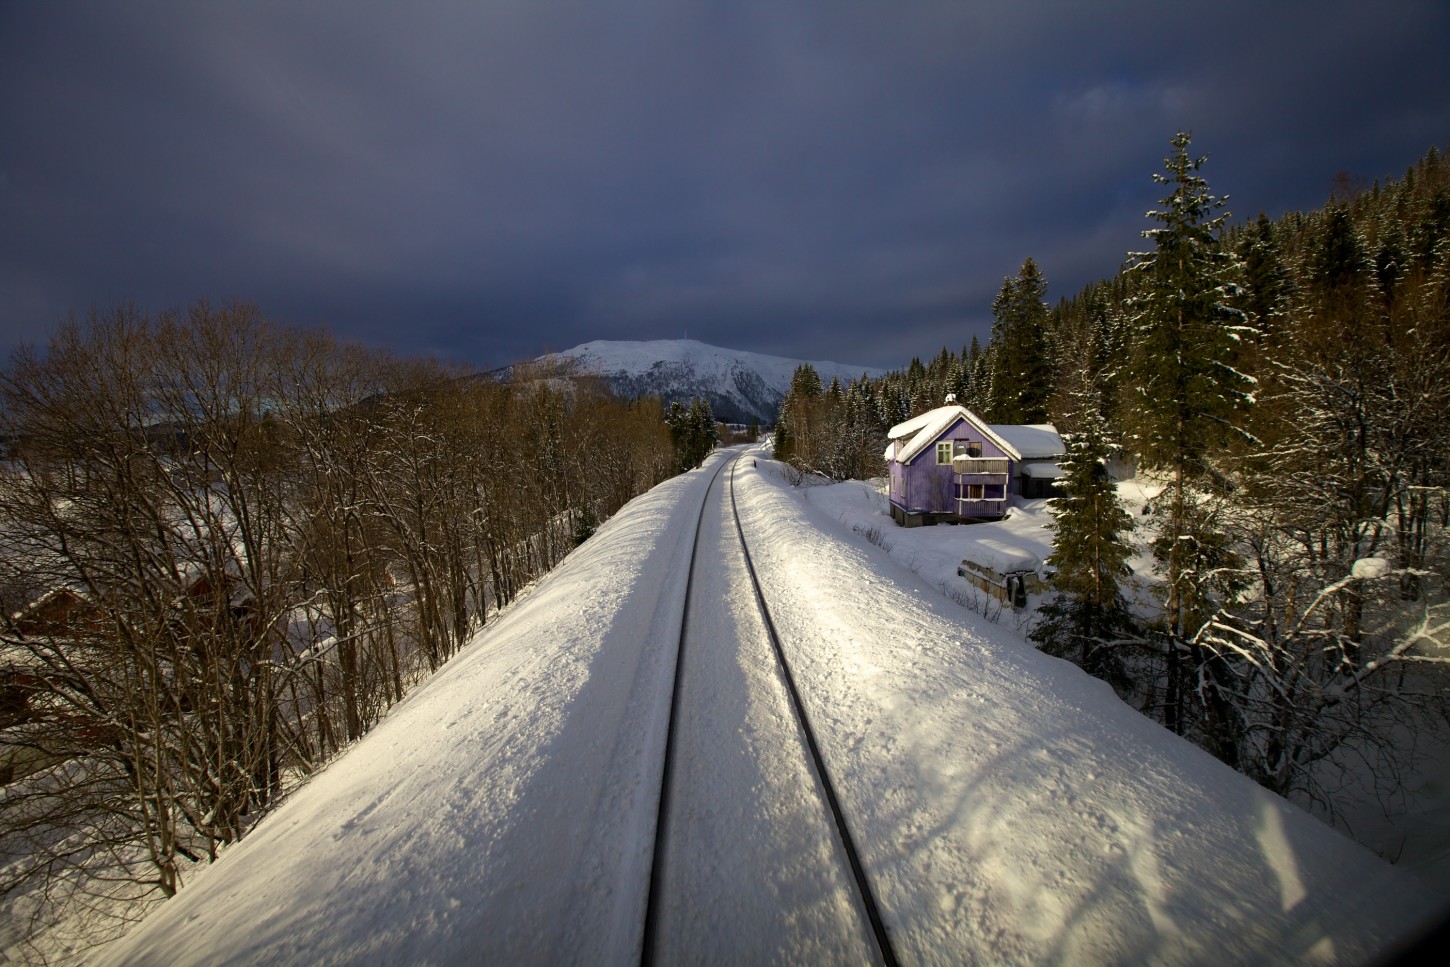 Train Journey to the Norwegian Arctic Circle, WINTER – curated by Phil Elverum (Mount Eerie)